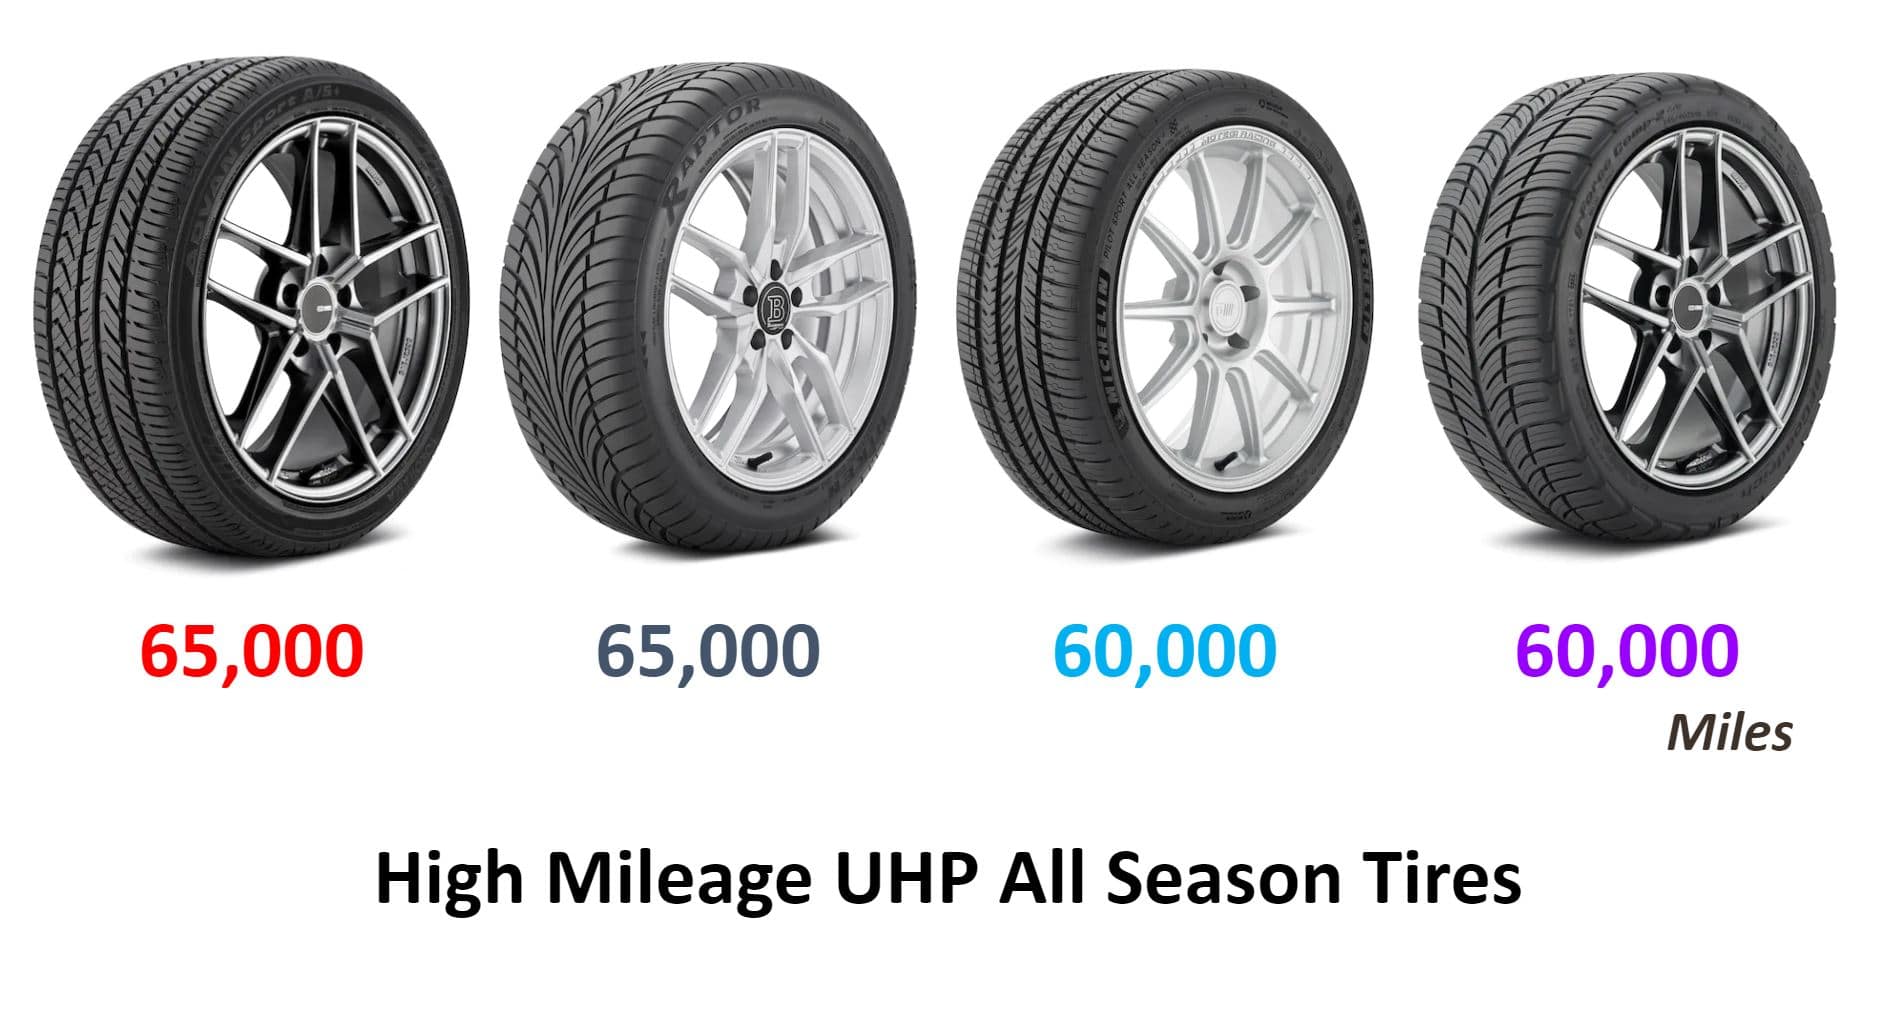 High Mileage Ultra High Performance All Season Tires - Top Tire Review